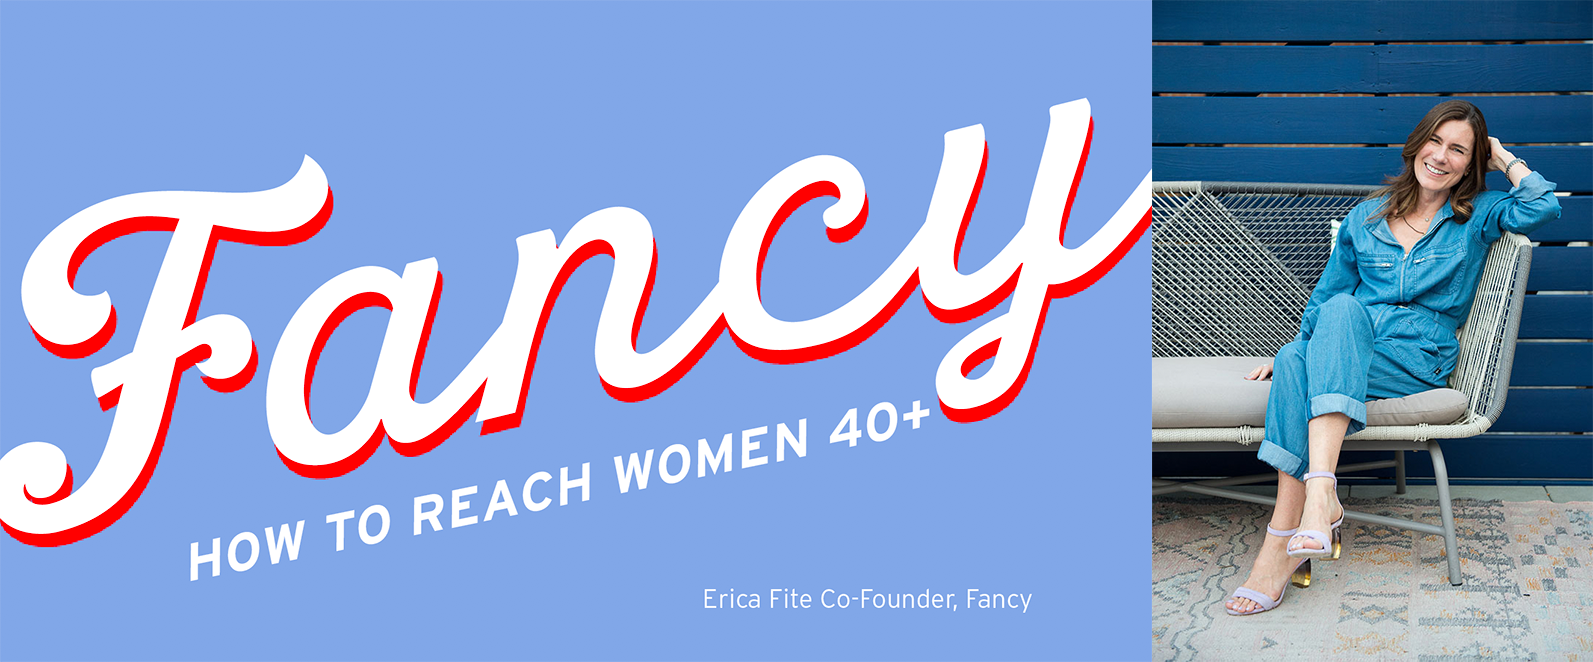 Women over 40 — Fancy—the women-owned, operated, and focused advertising  agency